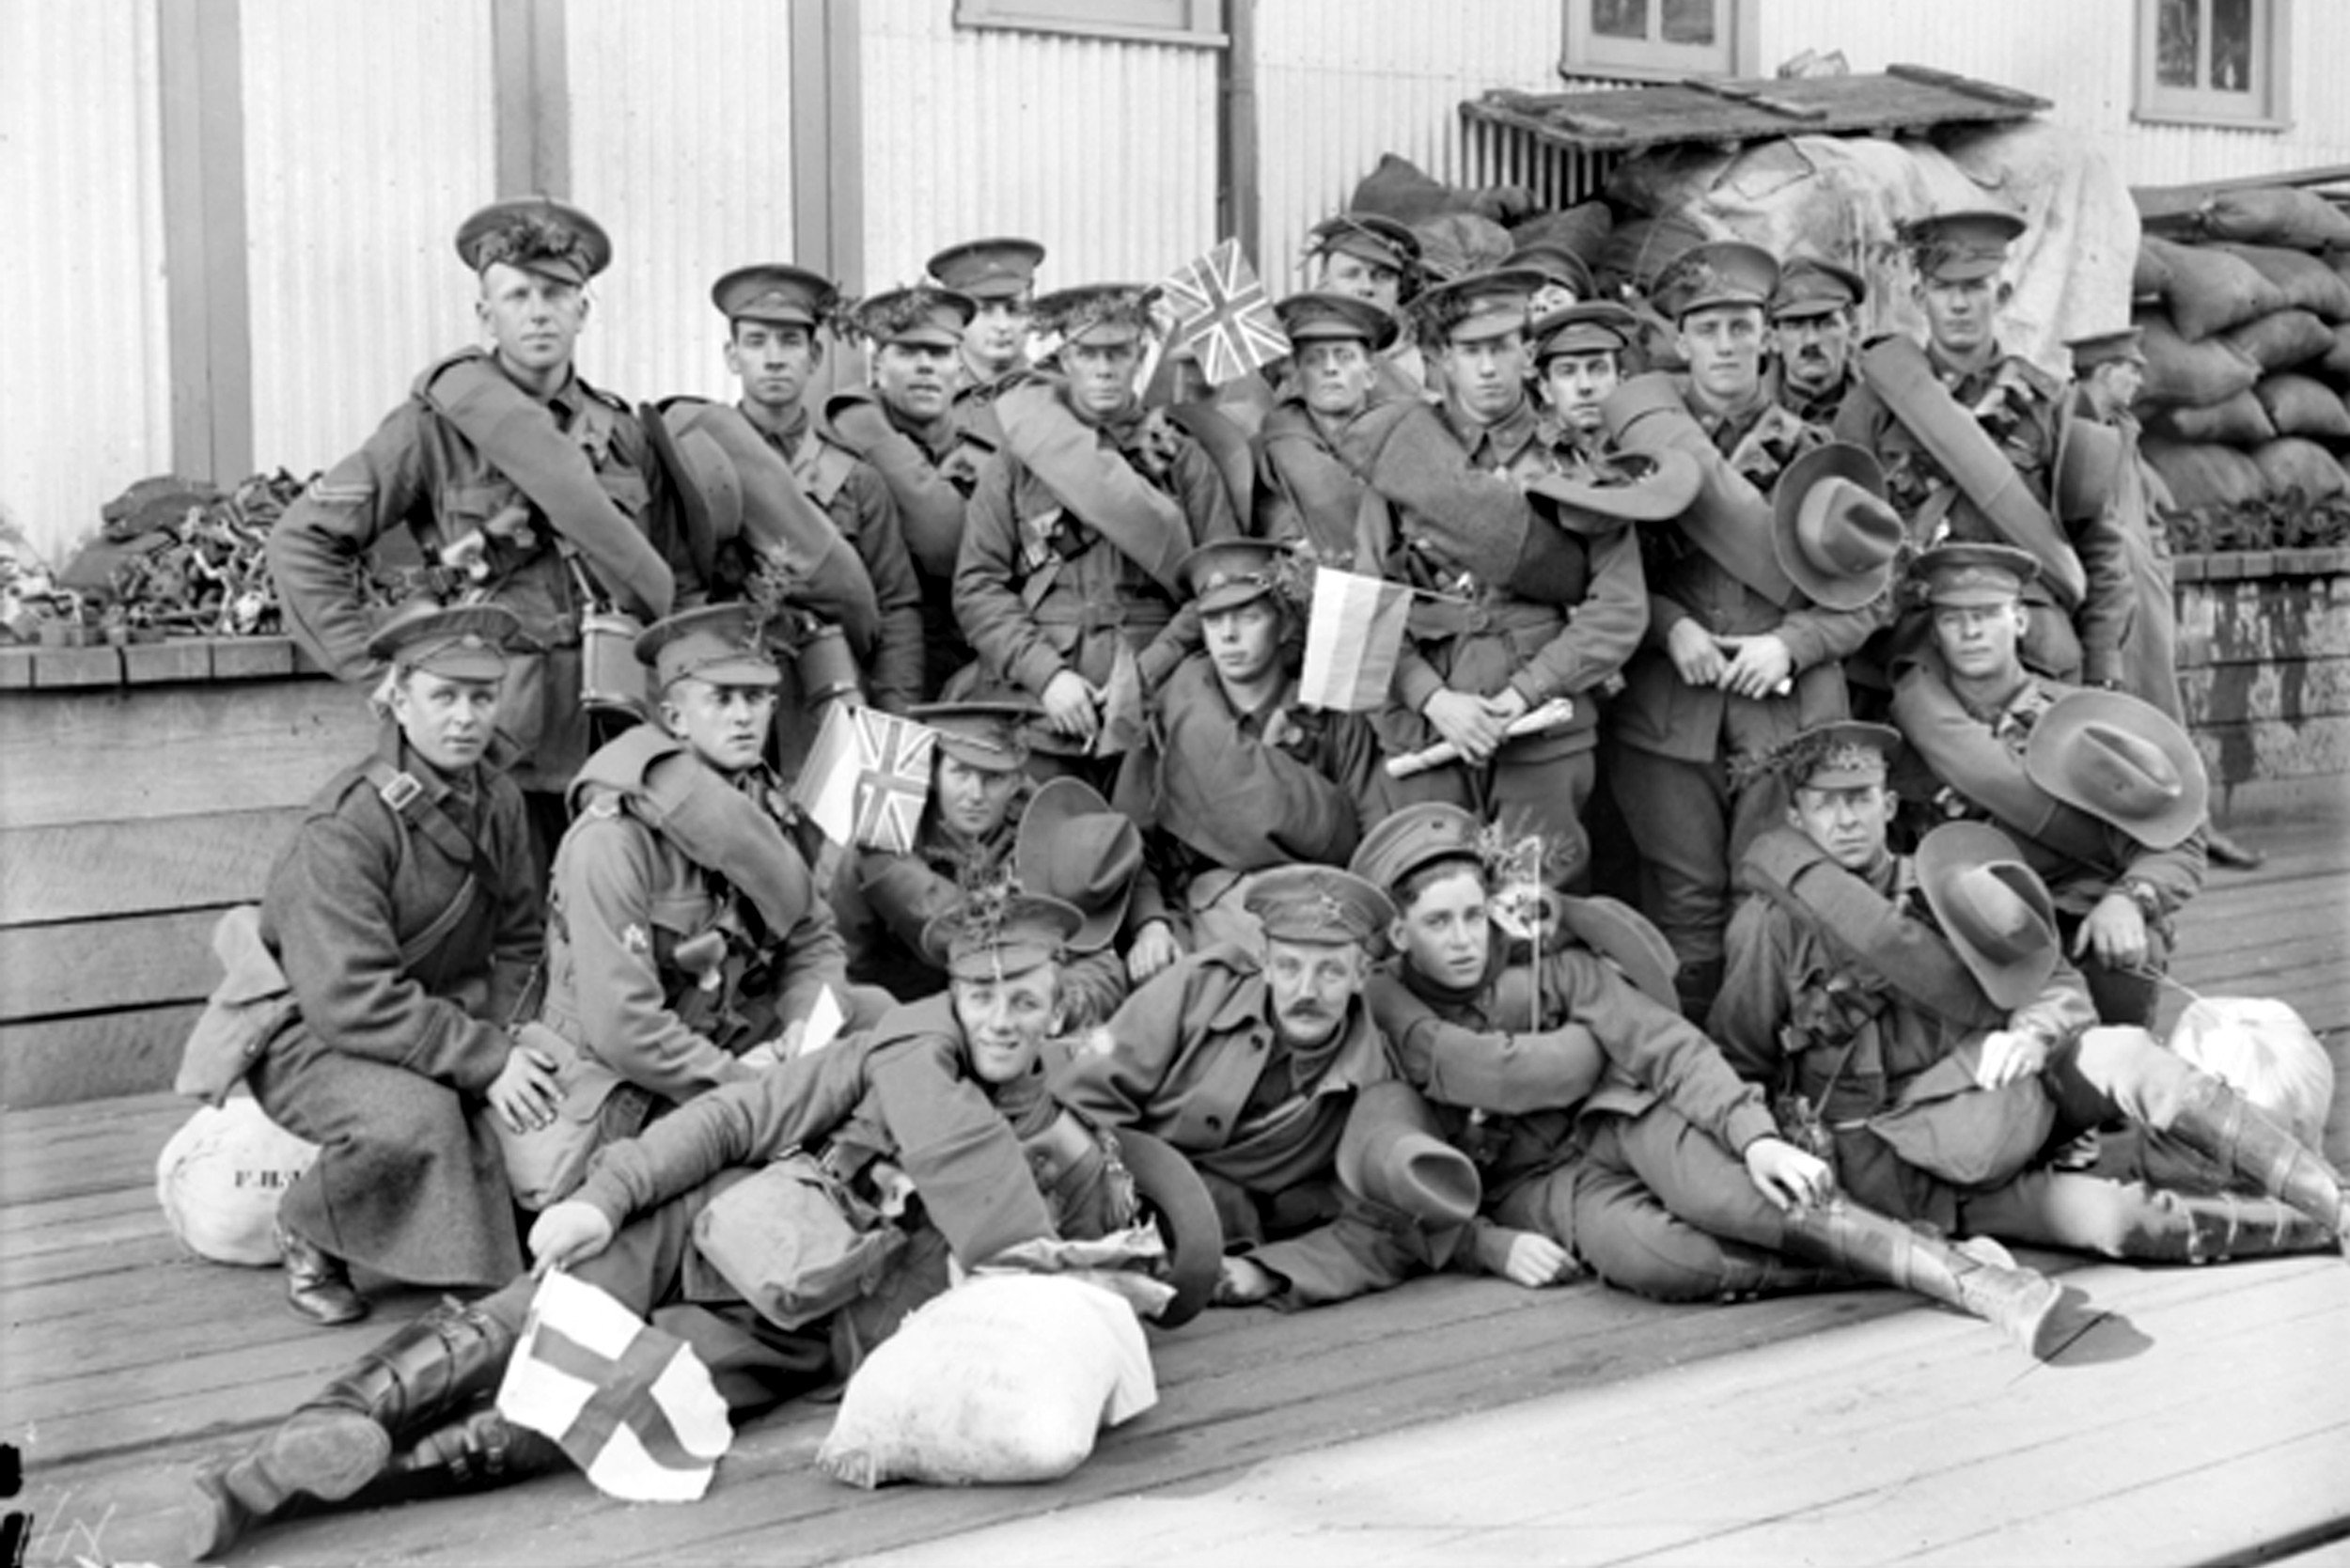  Port Melbourne, 1 August 1916 (WW1). Some of the soldiers have sprigs of wattle in their caps. Image courtesy of the Australian War Memorial. 